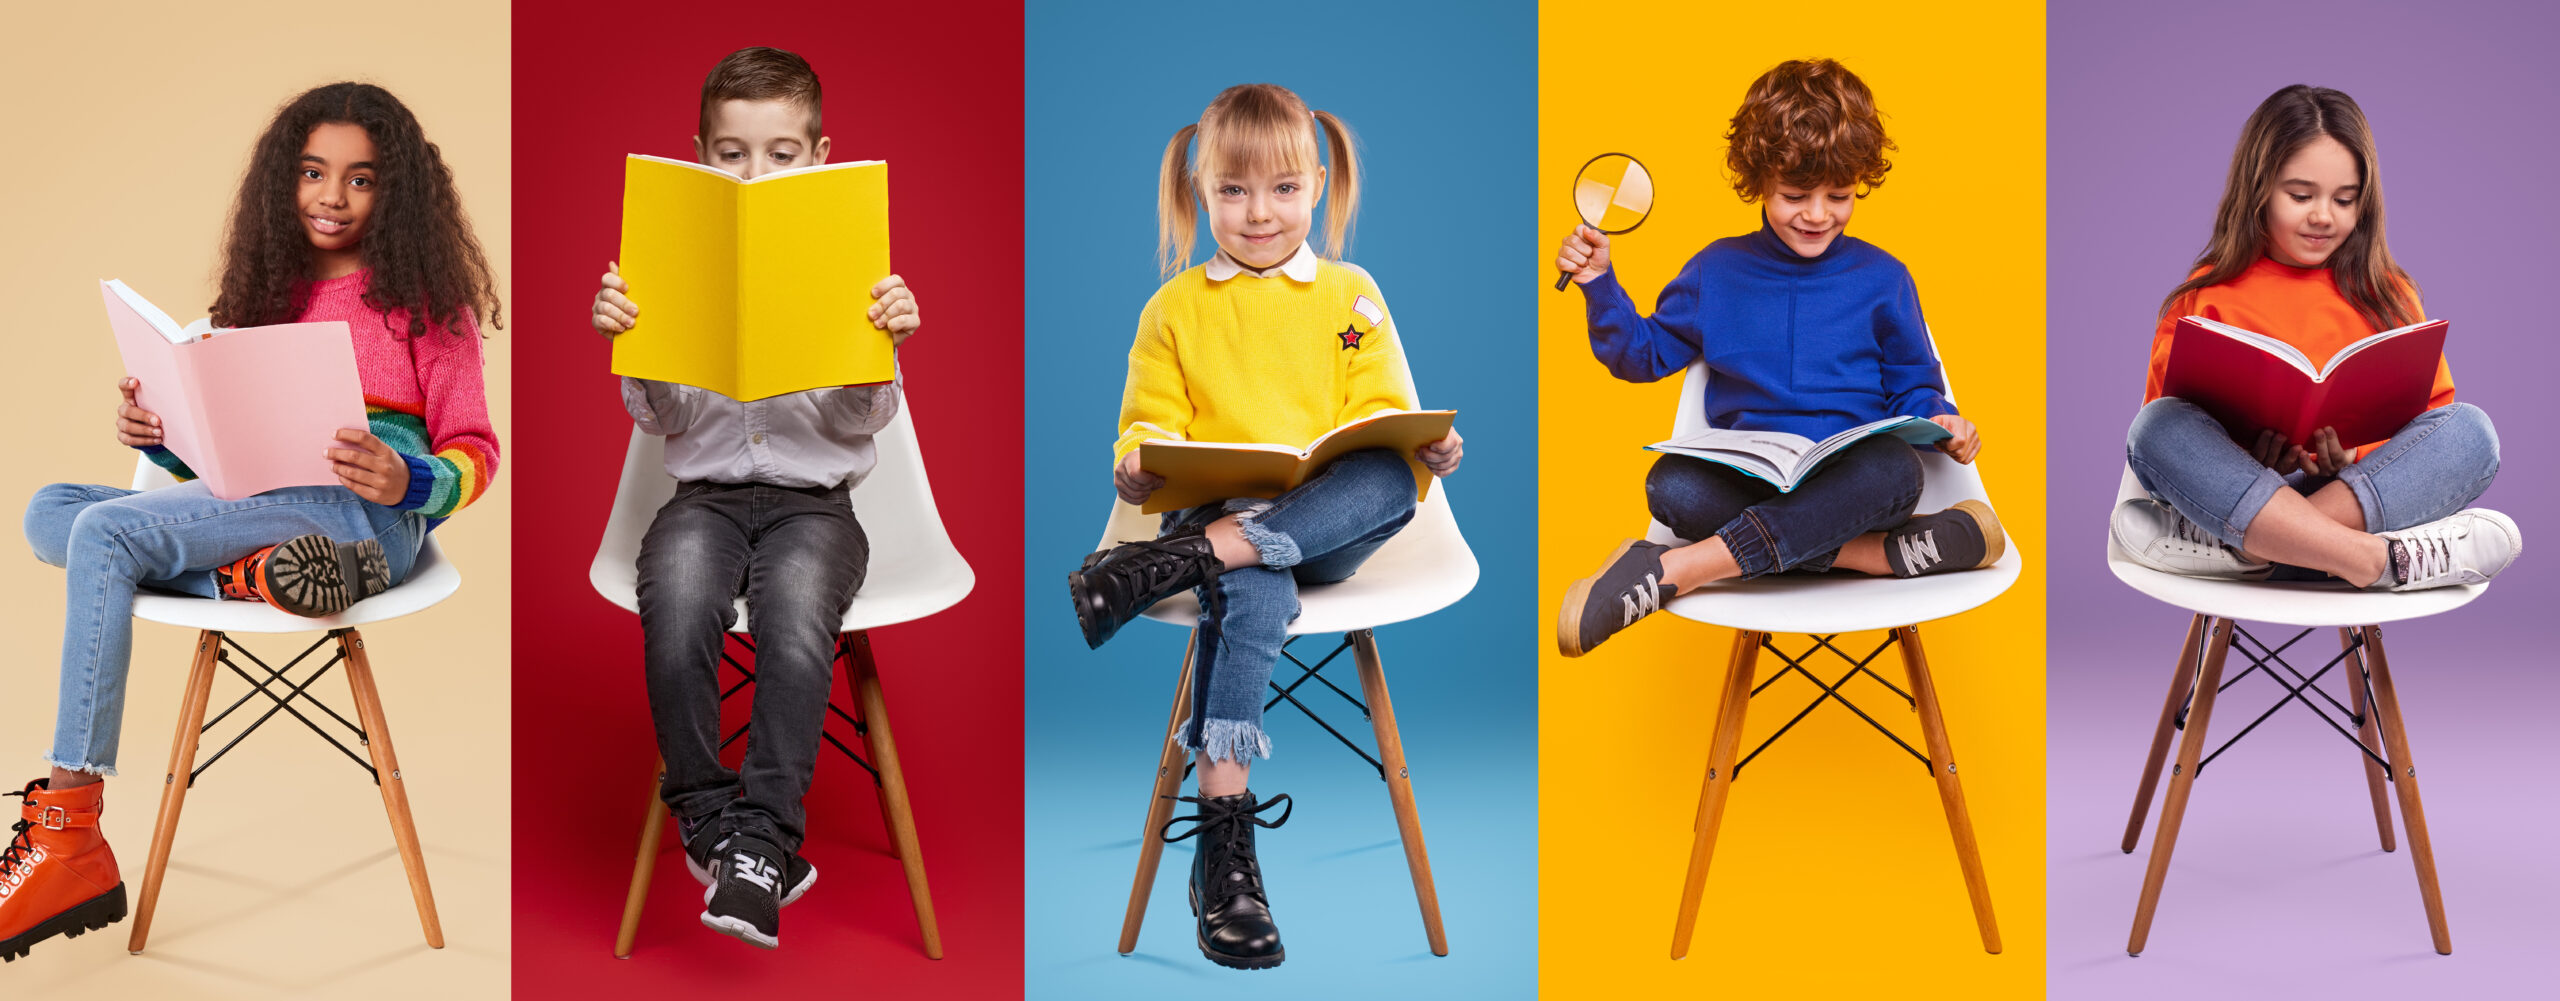 Collage of multiracial children in trendy outfits sitting on chairs and reading books while studying against colorful backgrounds